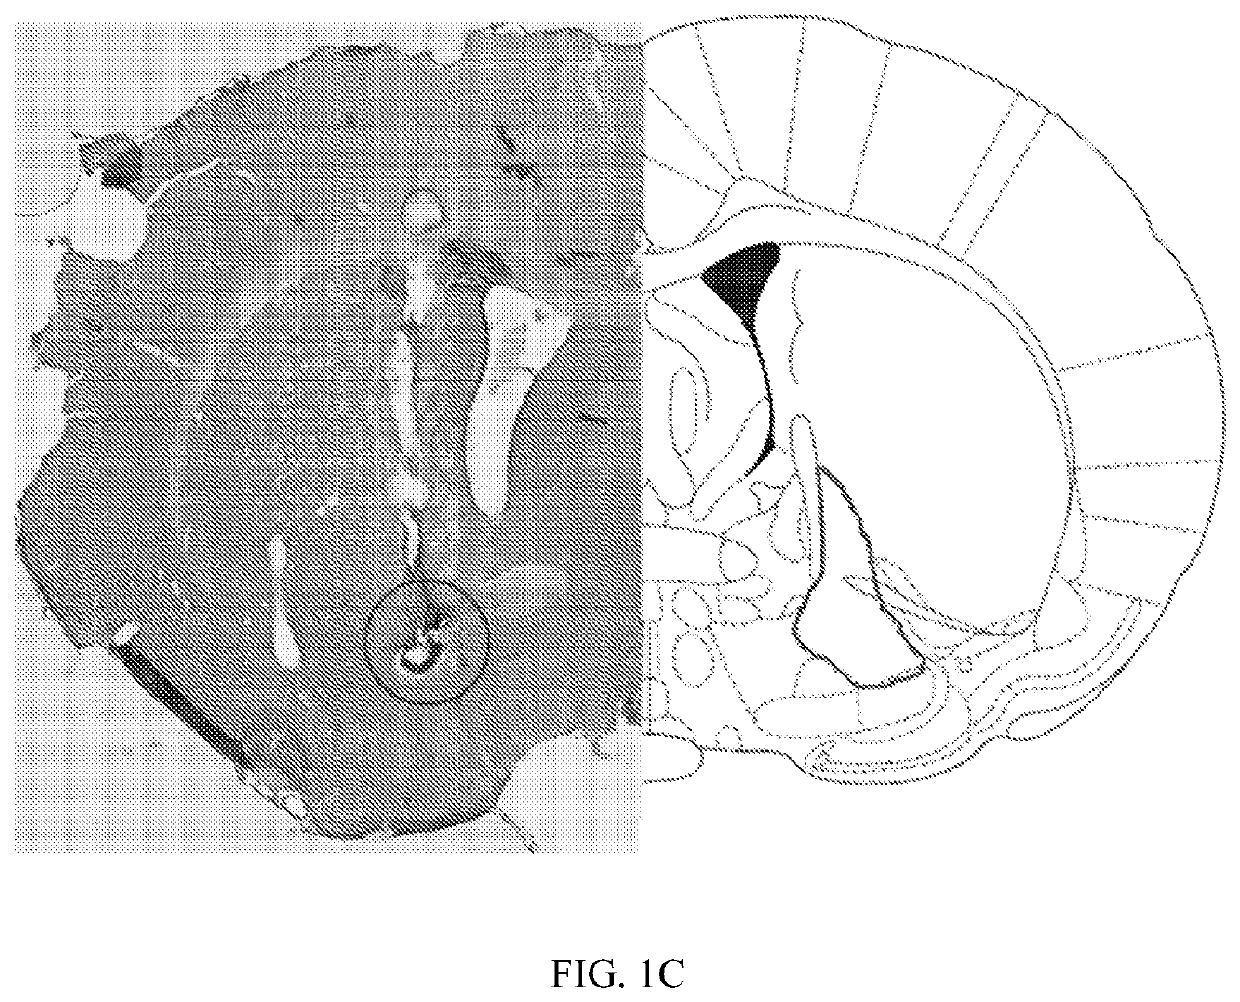 Stimulation of the ventral pallidum for the treatment of epilepsy